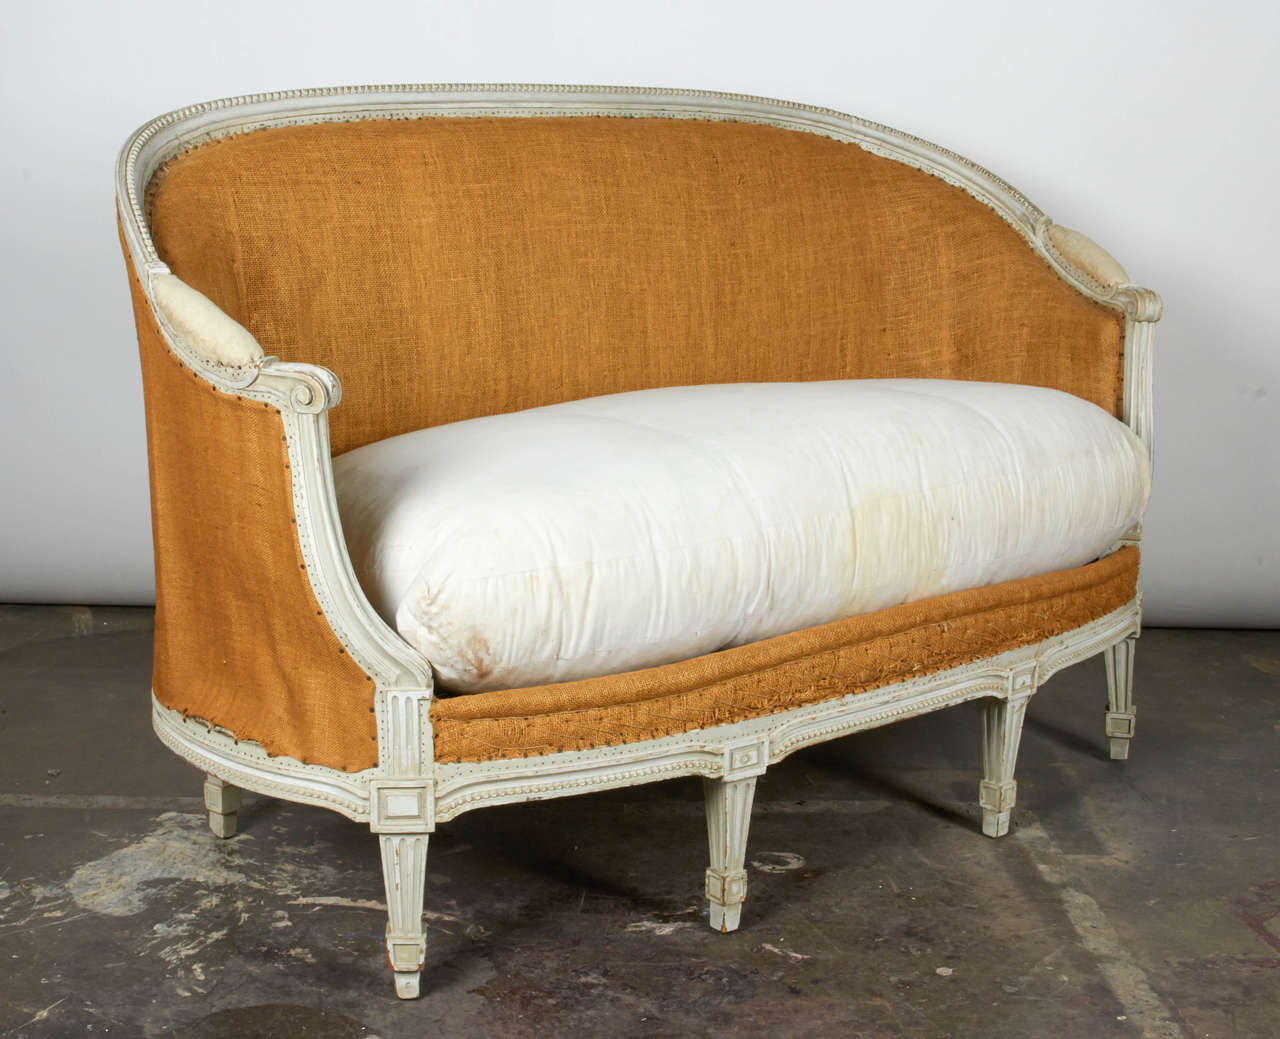 Delightful Gustavian settee or tub sofa with course woven fabric on all sides with the exception of the checkered pattern along the back. Removable 